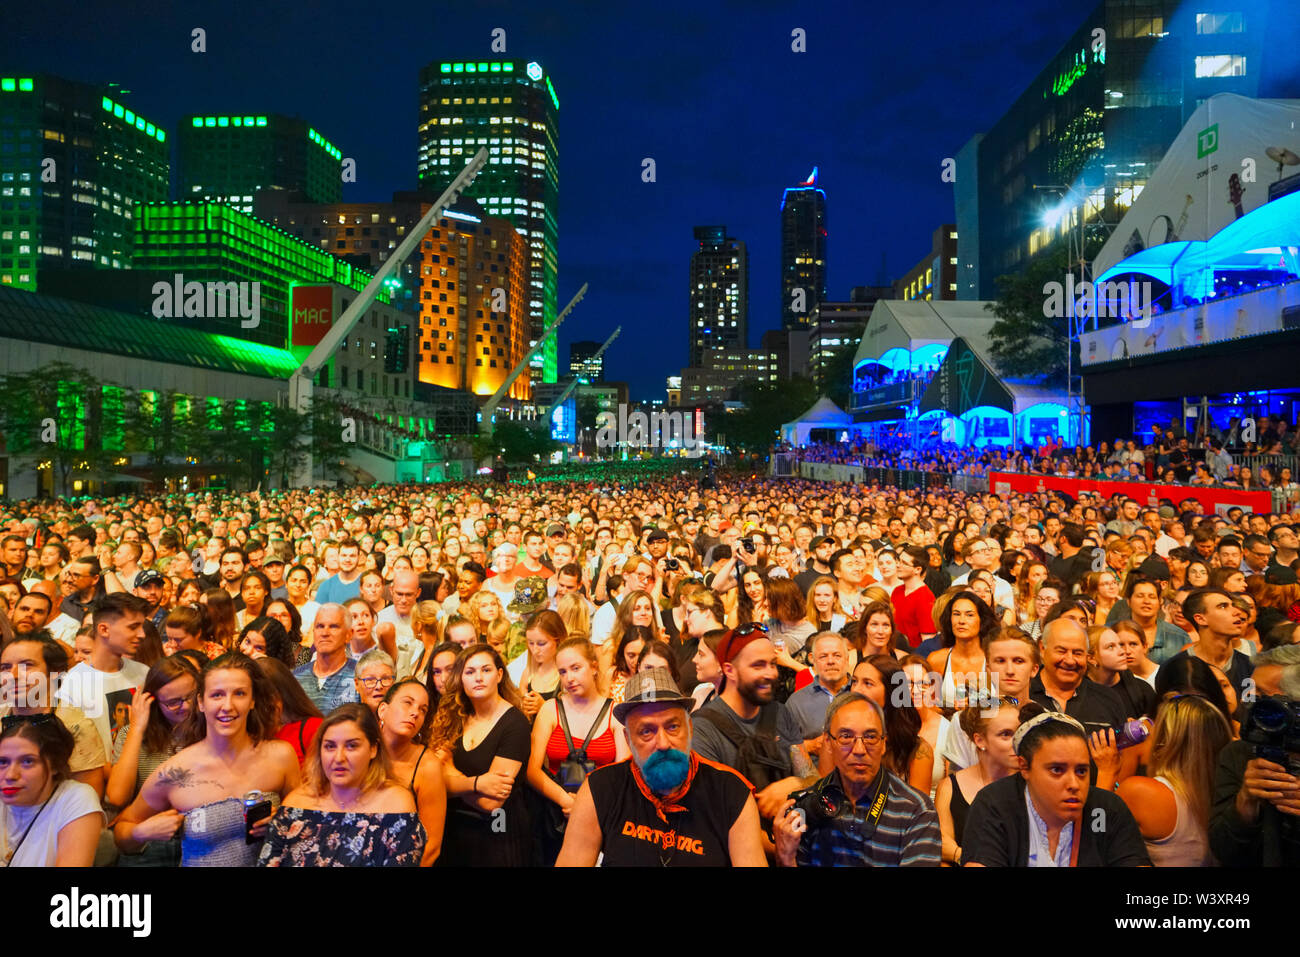 Montreal,Quebec,Canada,June 27,2019.Crowd of people at a FIJM concert in Montreal,Quebec,Canada.Credit:Mario Beauregard/Alamy Live News Stock Photo